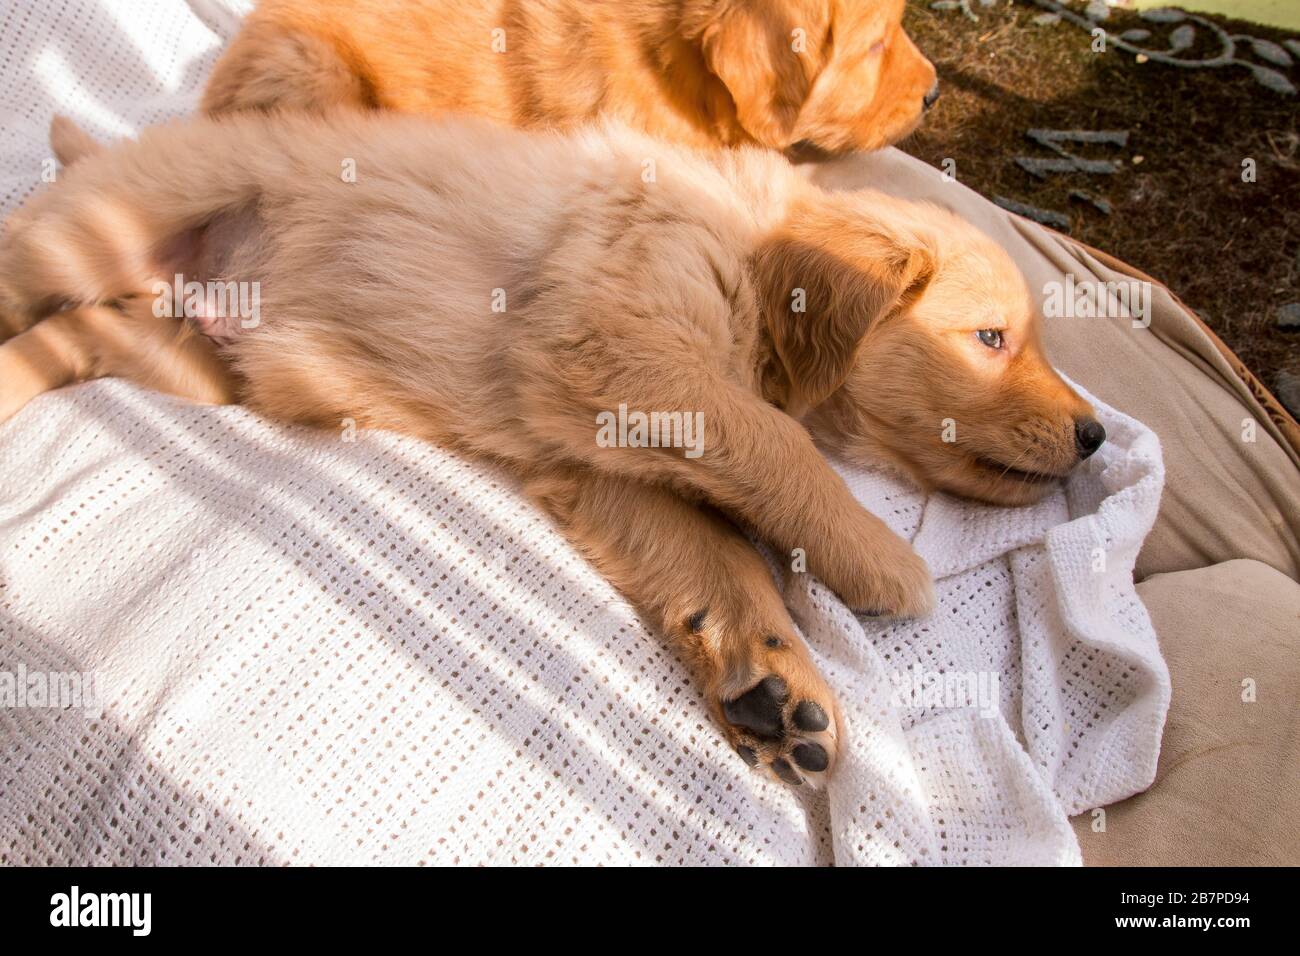 Cute, Fluffy and Adorable Golden Retriever Puppies Laying in Bed in the Sunlight Stock Photo